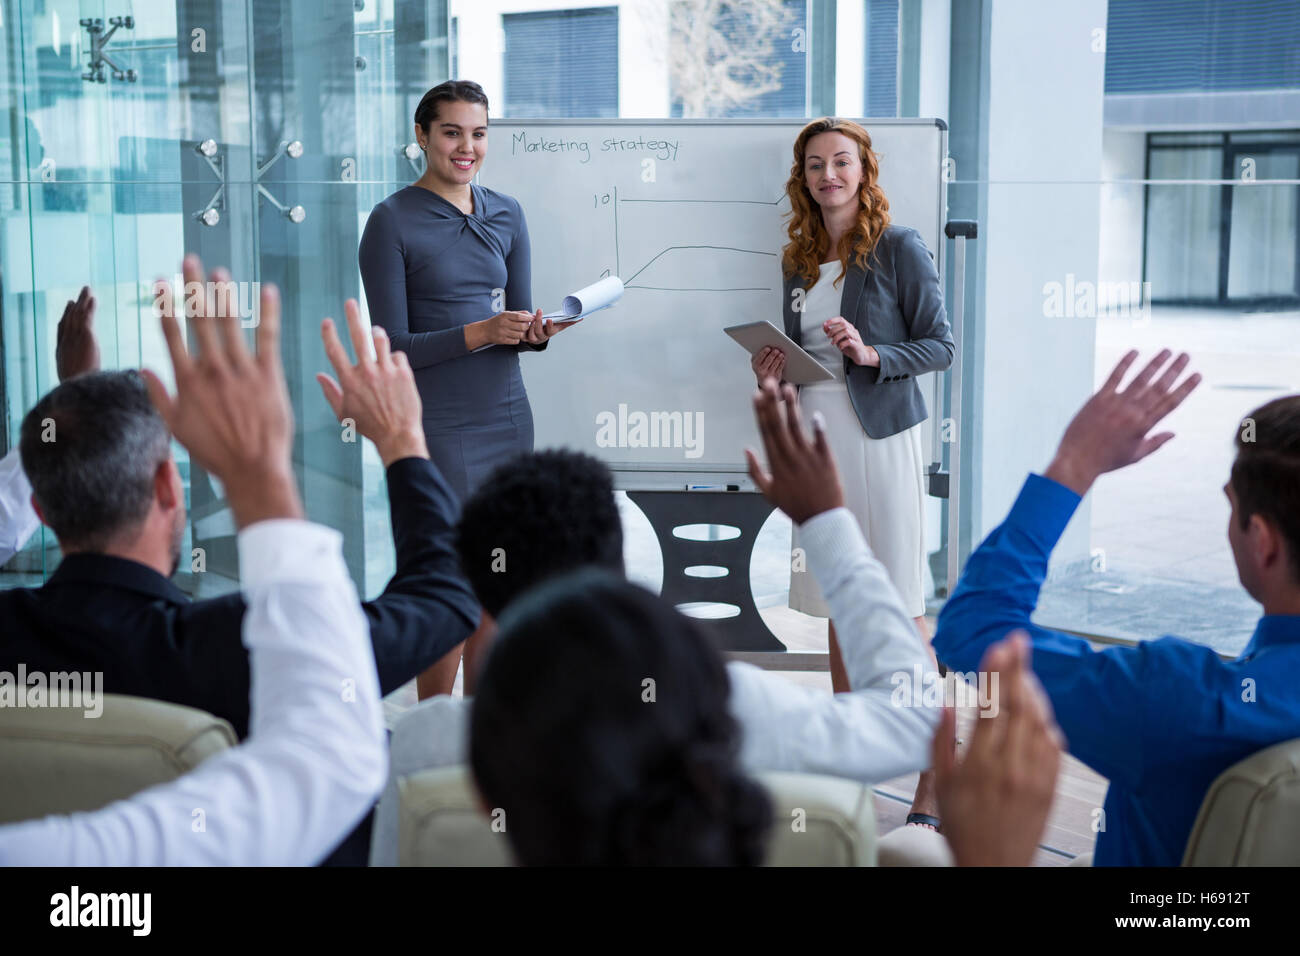 Colleagues raising their hands during meeting Stock Photo